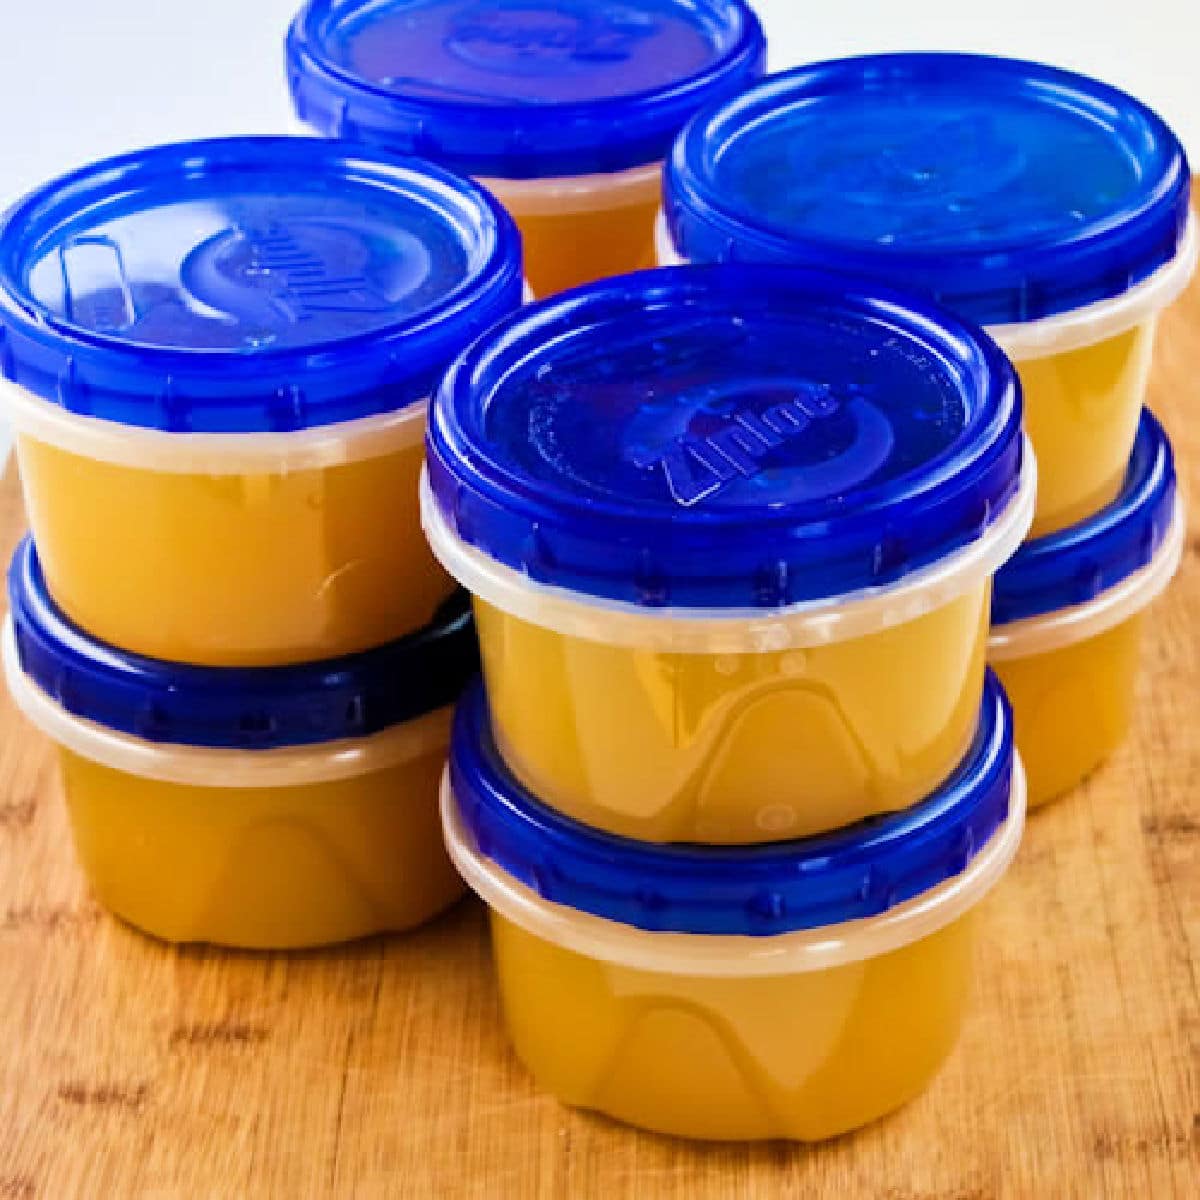 Square image for How to Make Chicken Stock showing stock in containers for freezer.